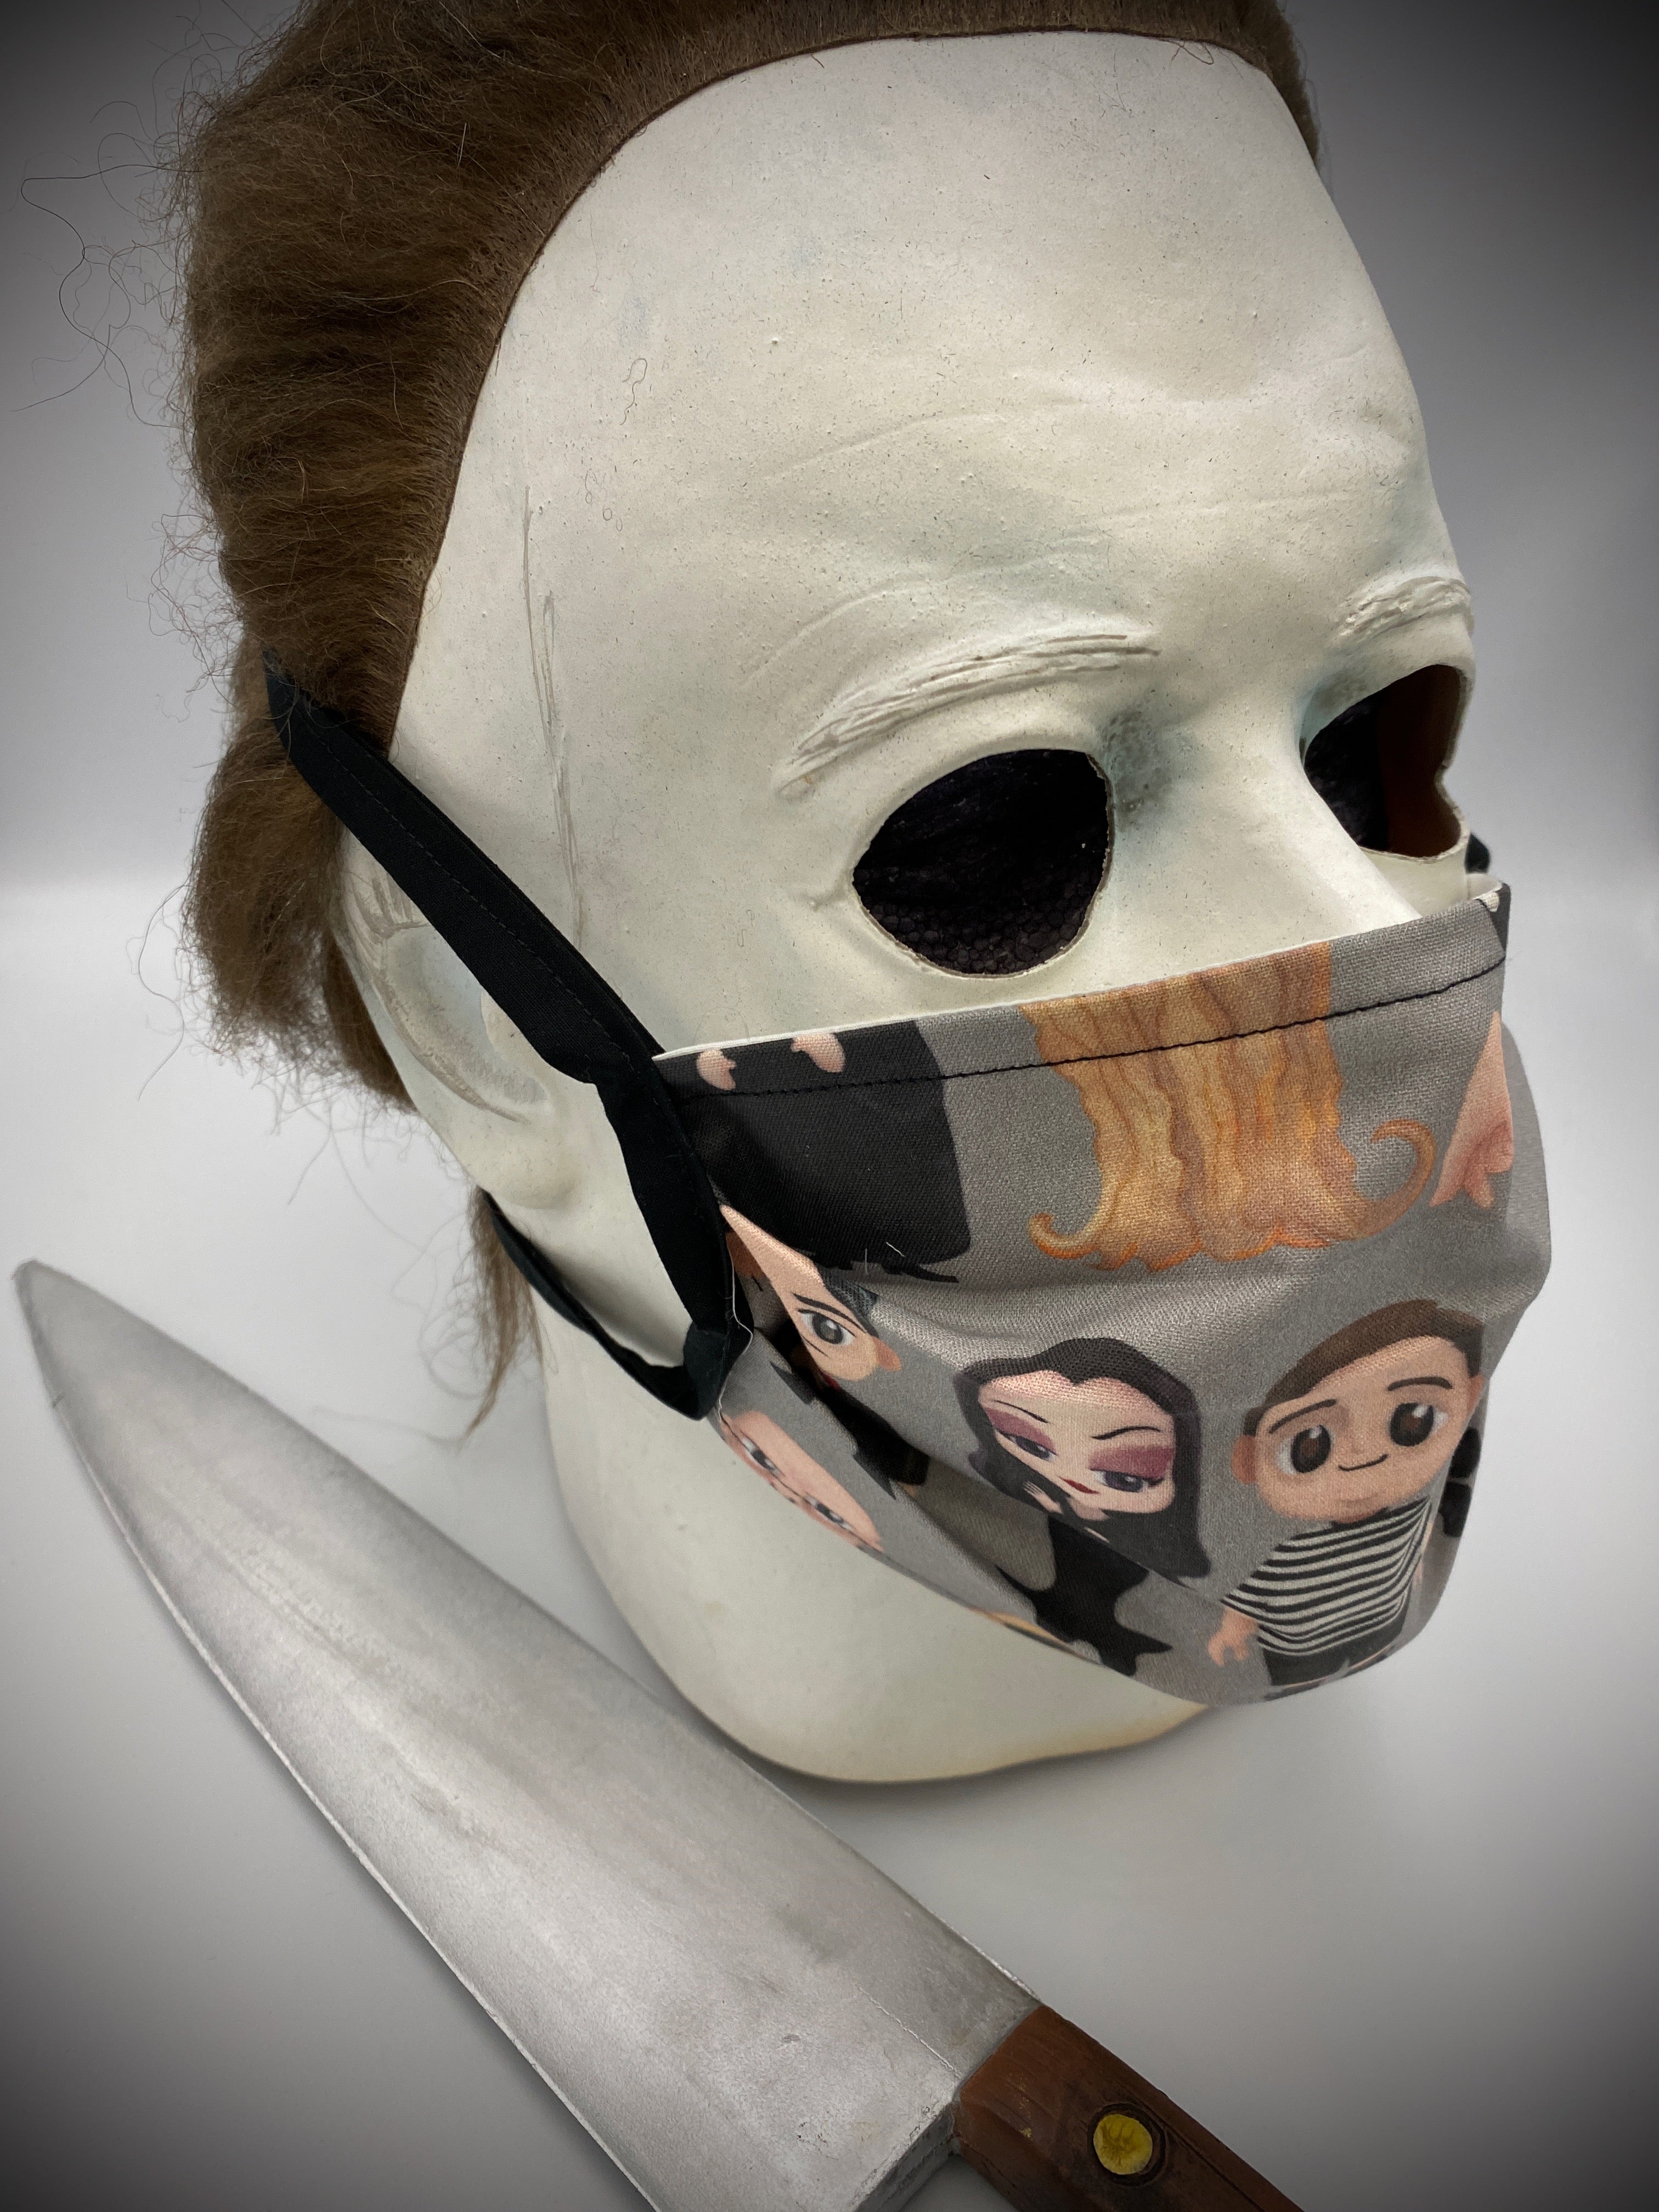 This is a grey protective face mask with black ties and has Addams Family characters Gomez, Morticia, Wednesday, Pugsley, Lurch, Uncle Fester and Cousin Itt and is on a Michael Myers mask.